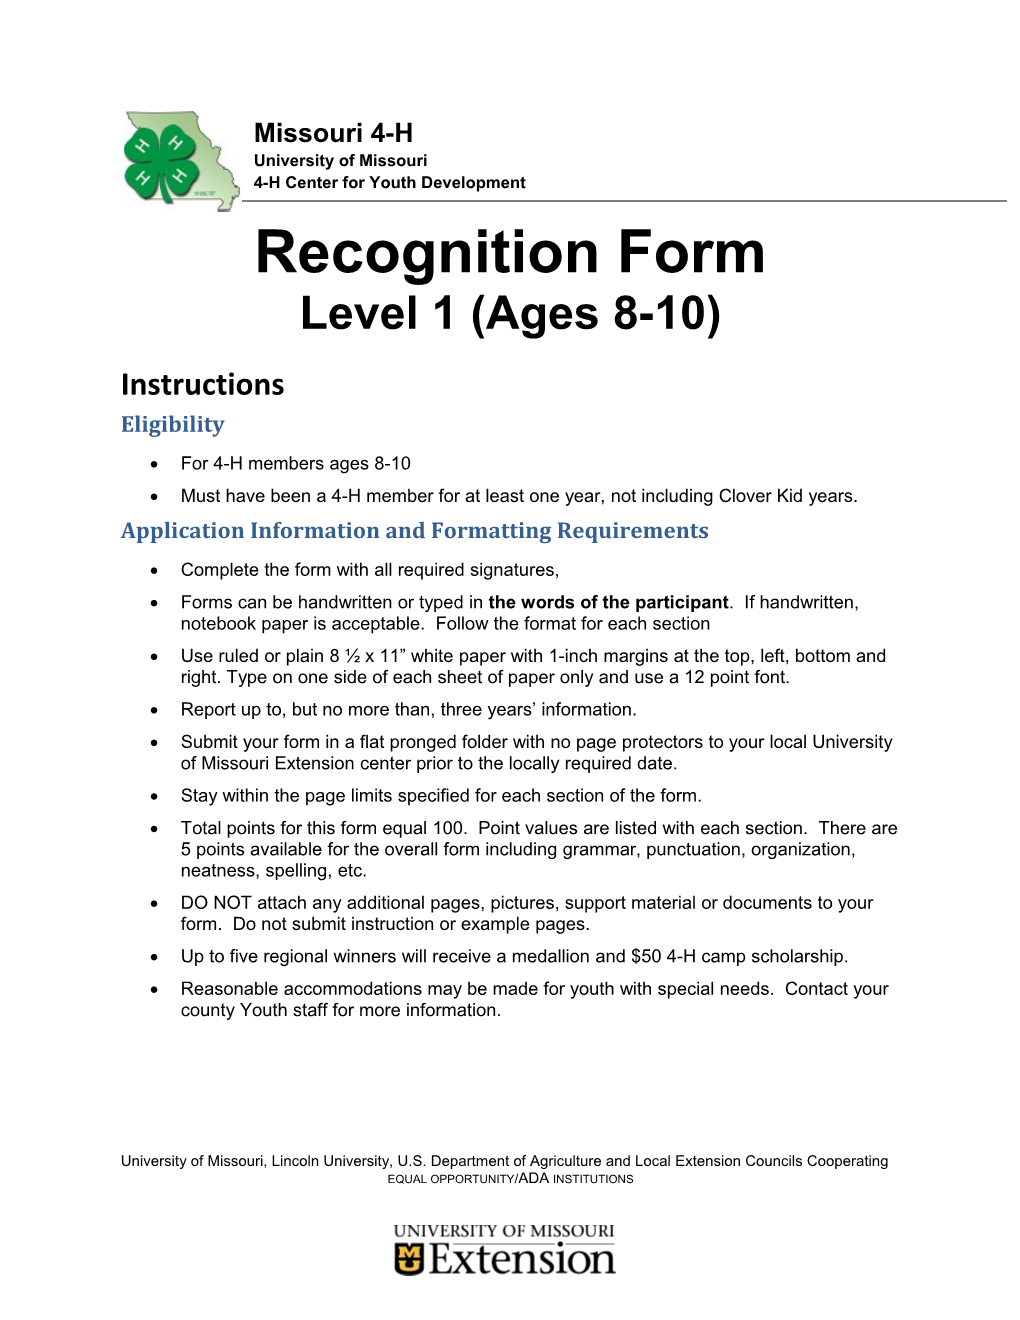 Application Information and Formatting Requirements